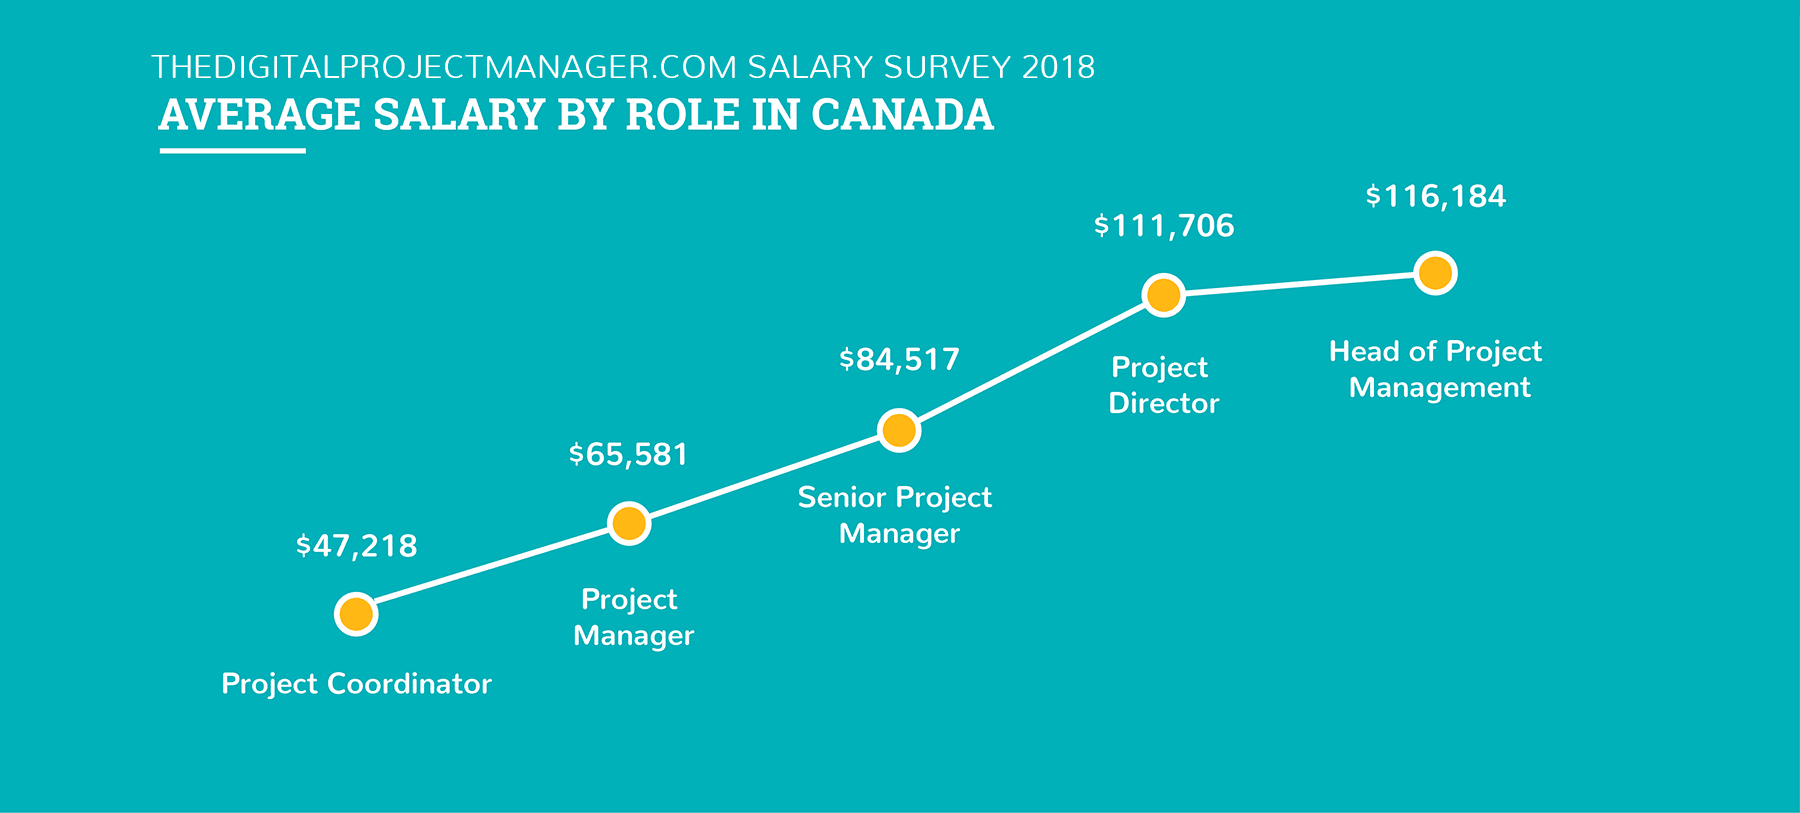 line graph showing difference in salaries between different project management roles in canada according to our survey data from 2018